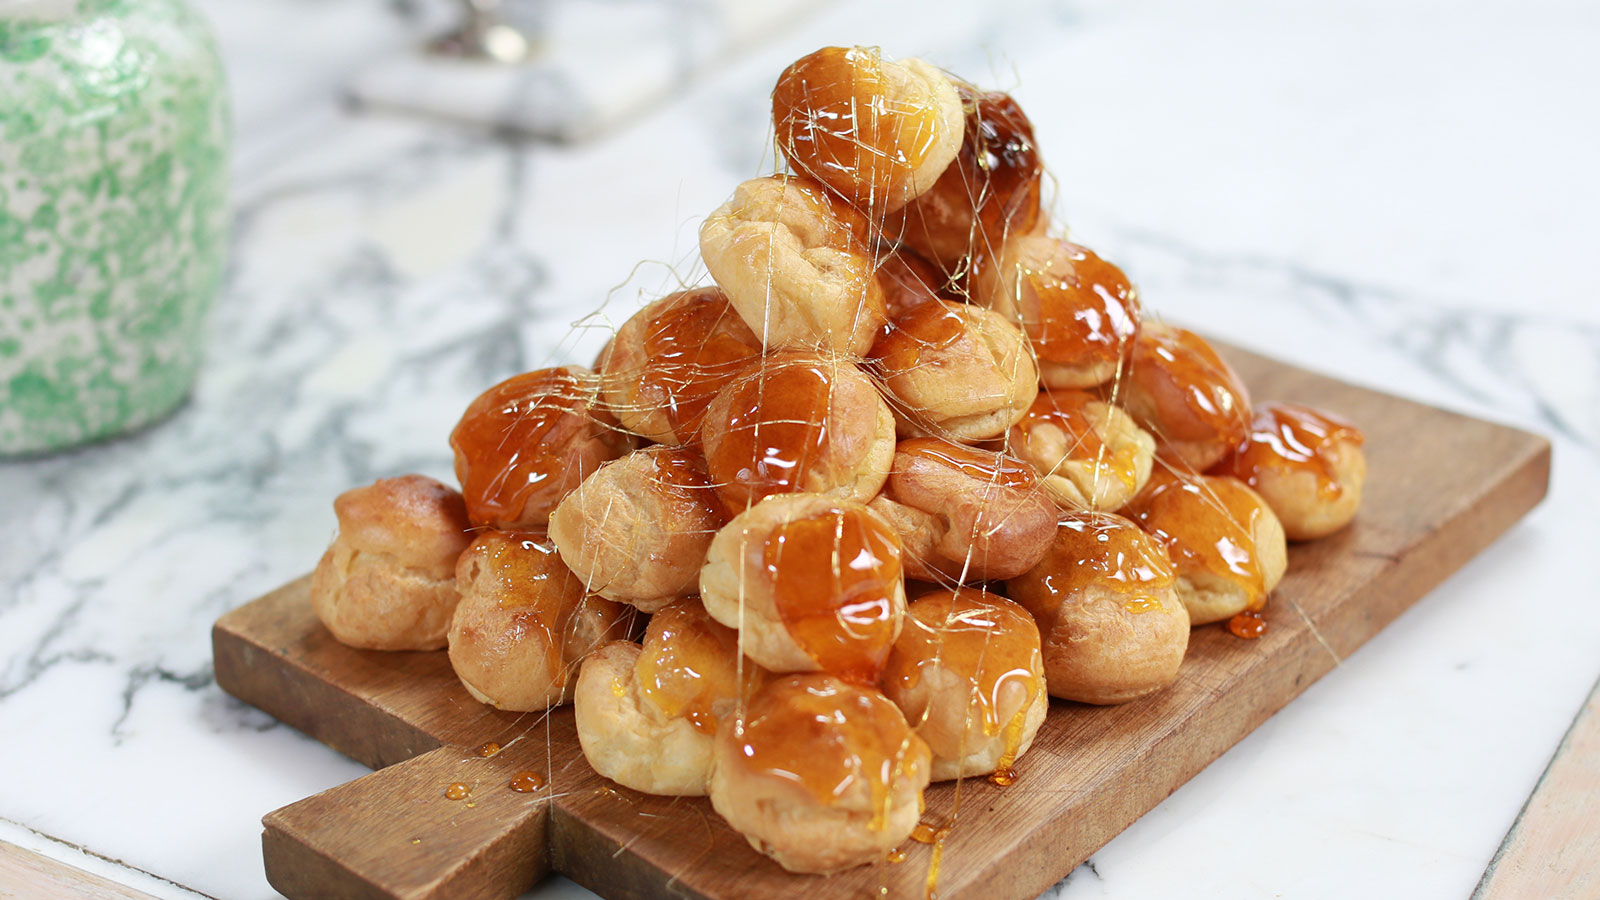 This Picture Quiz Will Challenge Your Knowledge of Classic French Desserts 🥐 – Can You Score High? Croquembouche